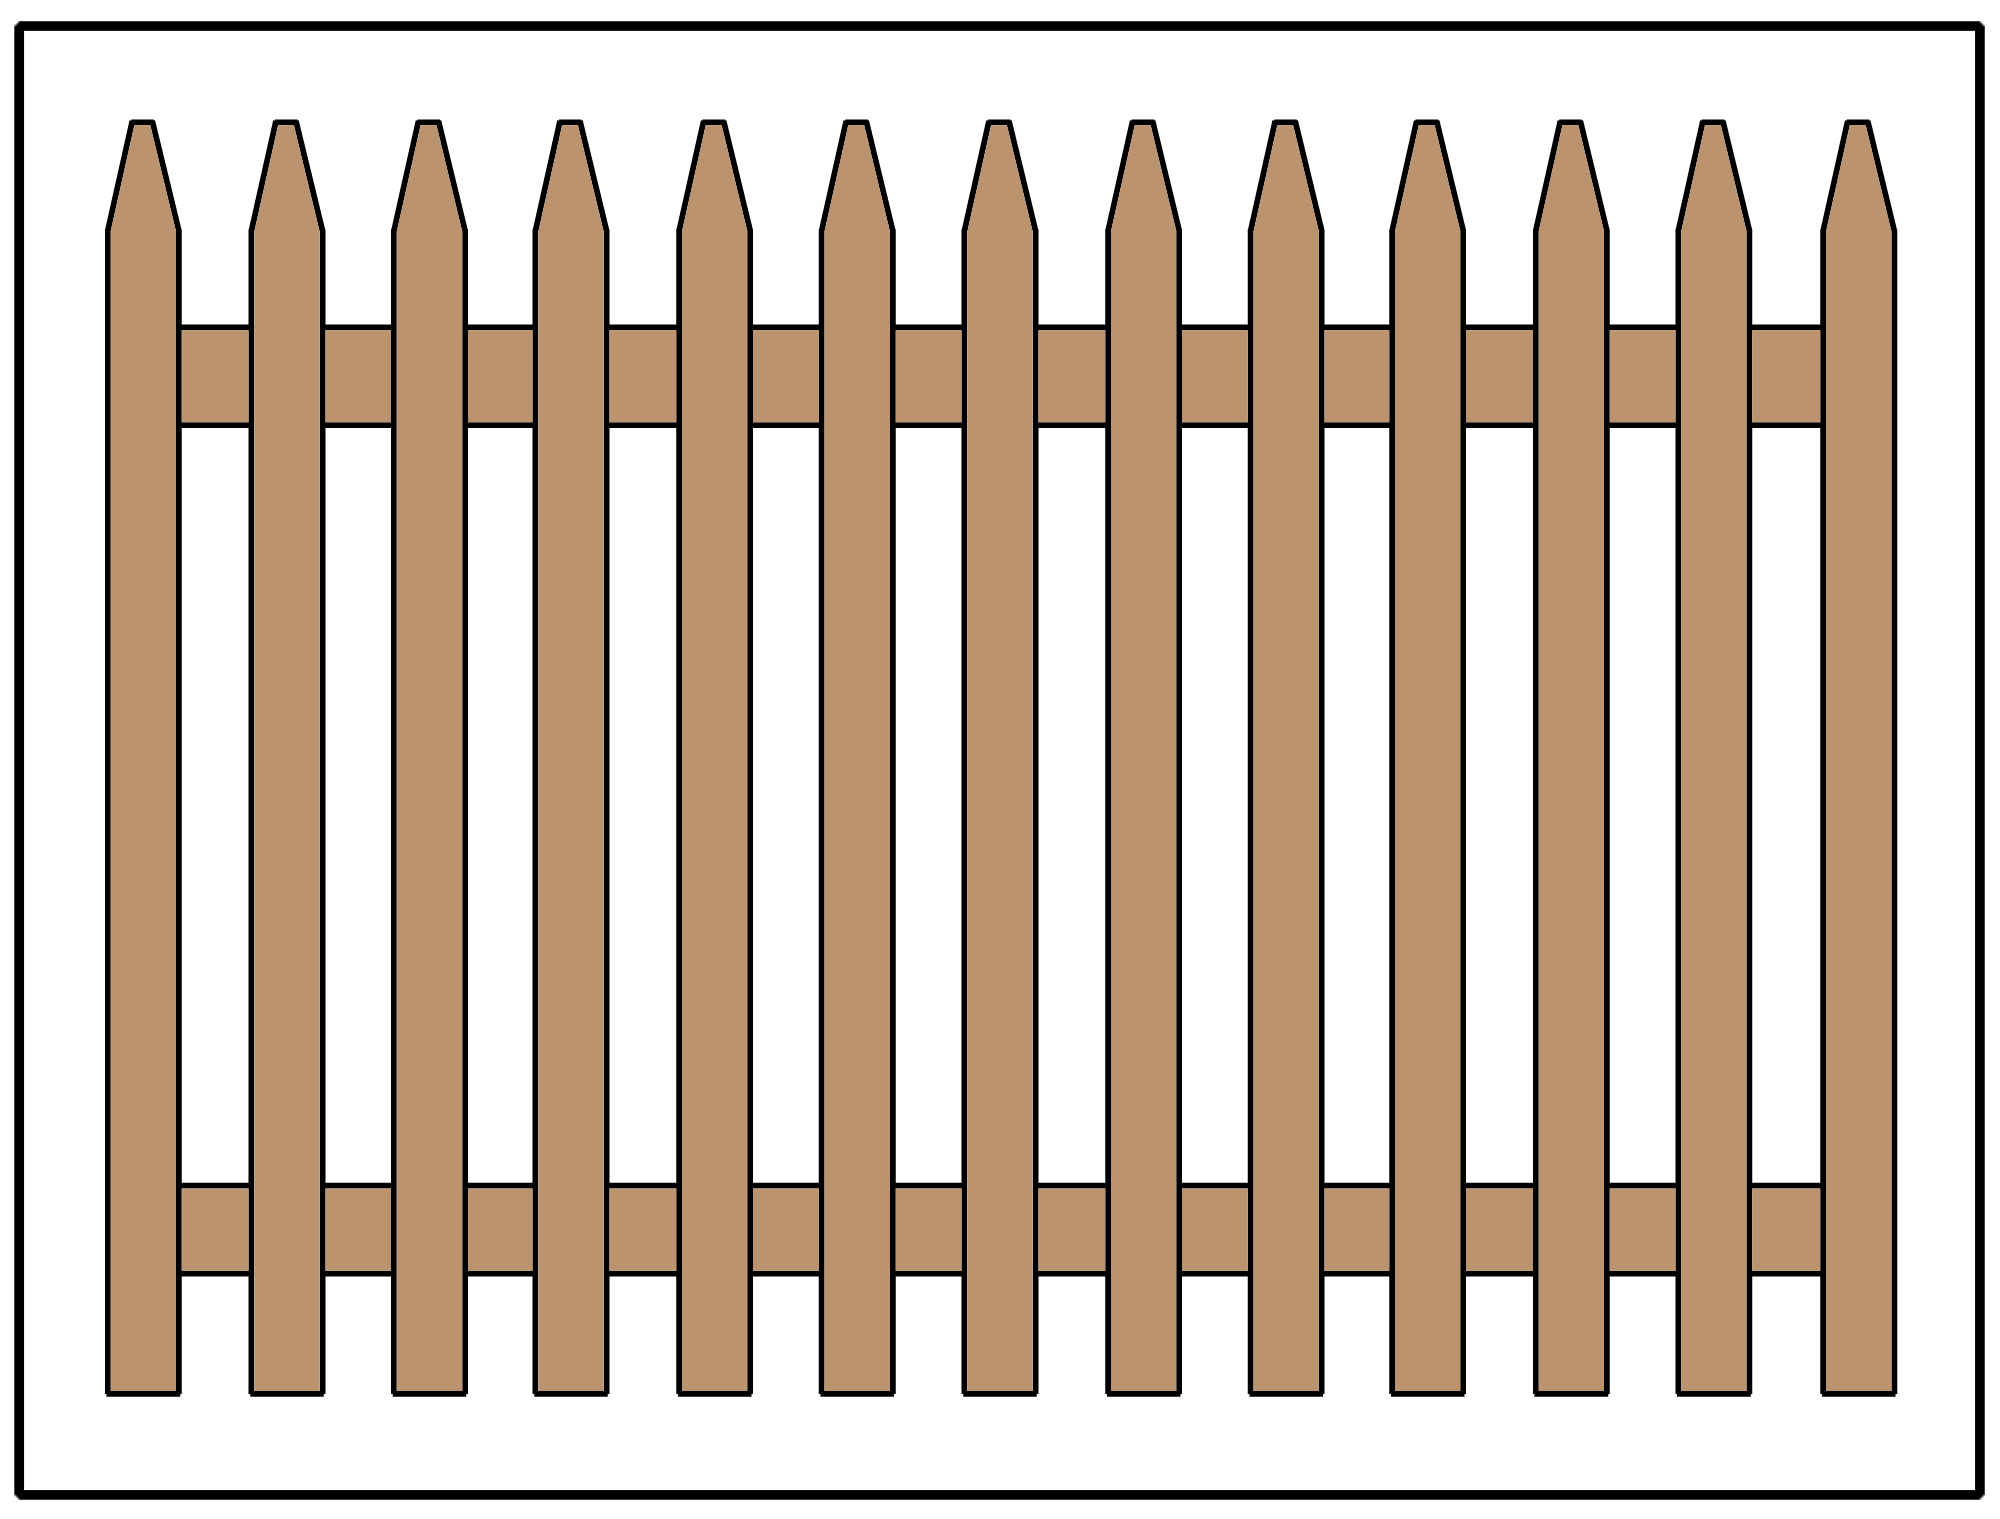 Illustration of a picket fence design using common pickets